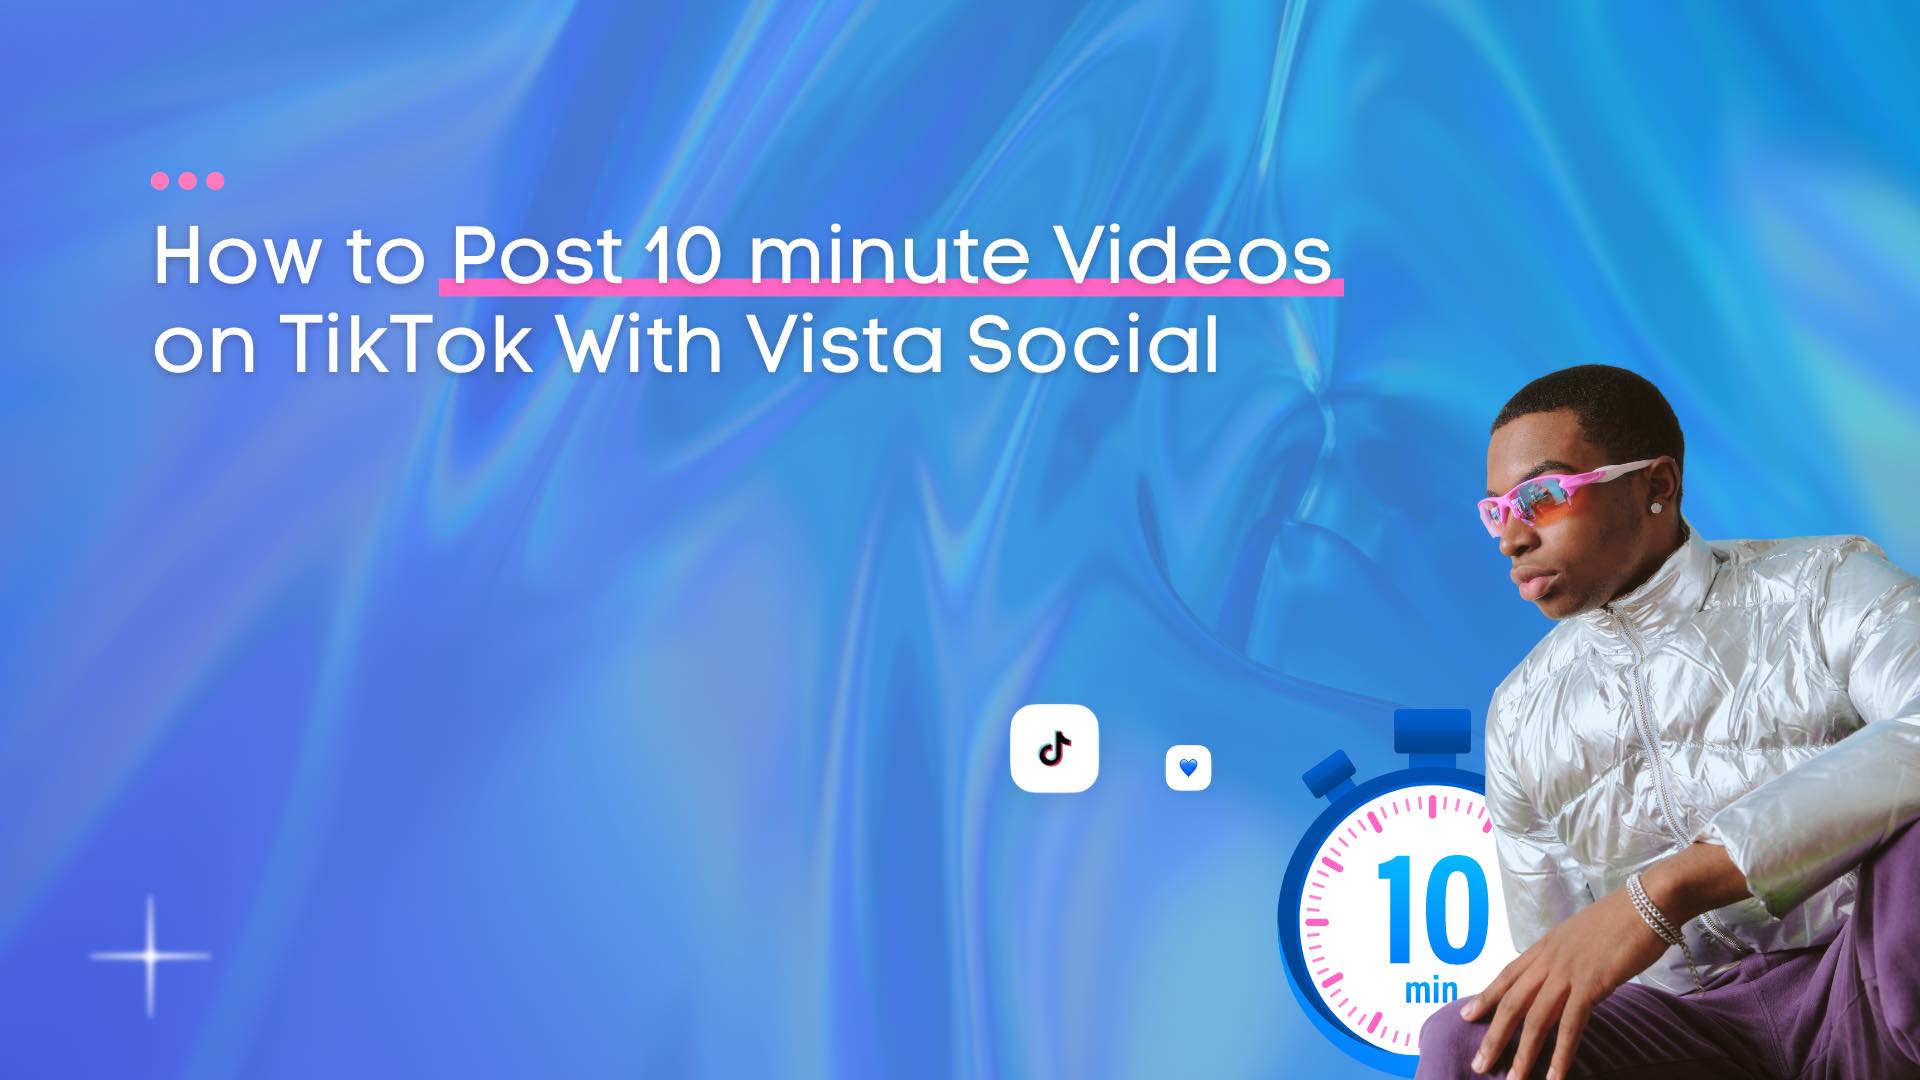 How to Post 10 minute Videos on TikTok With Vista Social